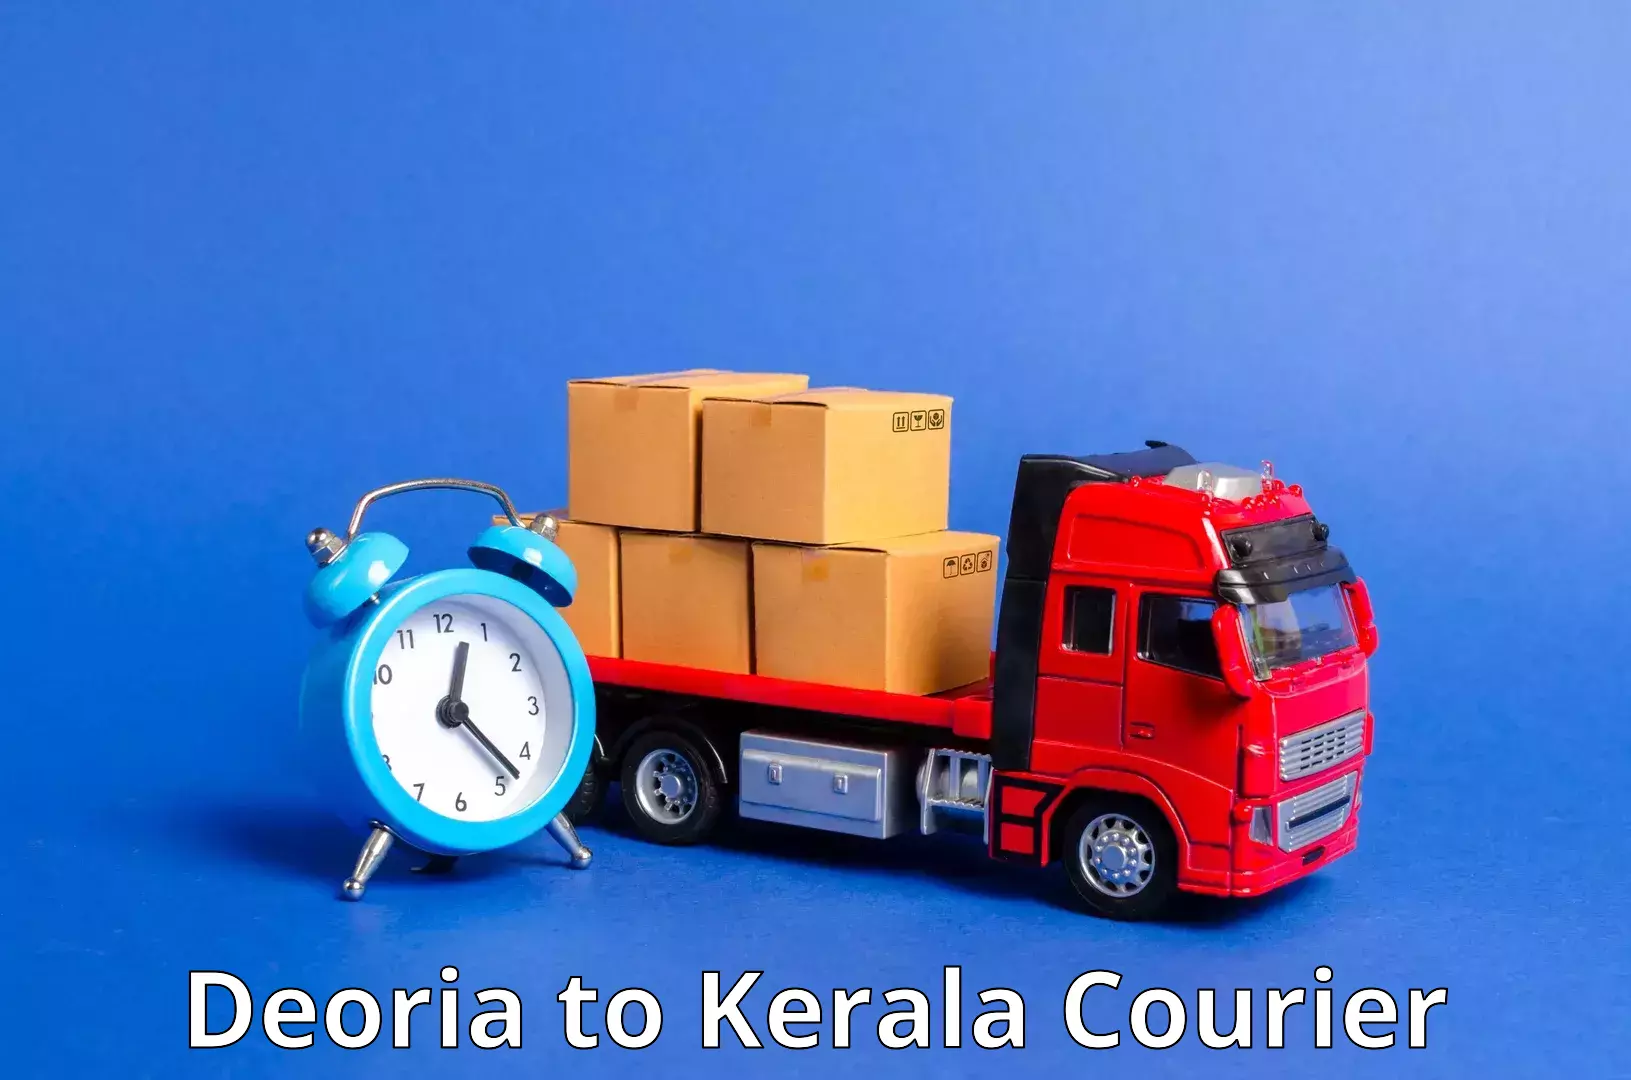 Nationwide delivery network Deoria to Kerala